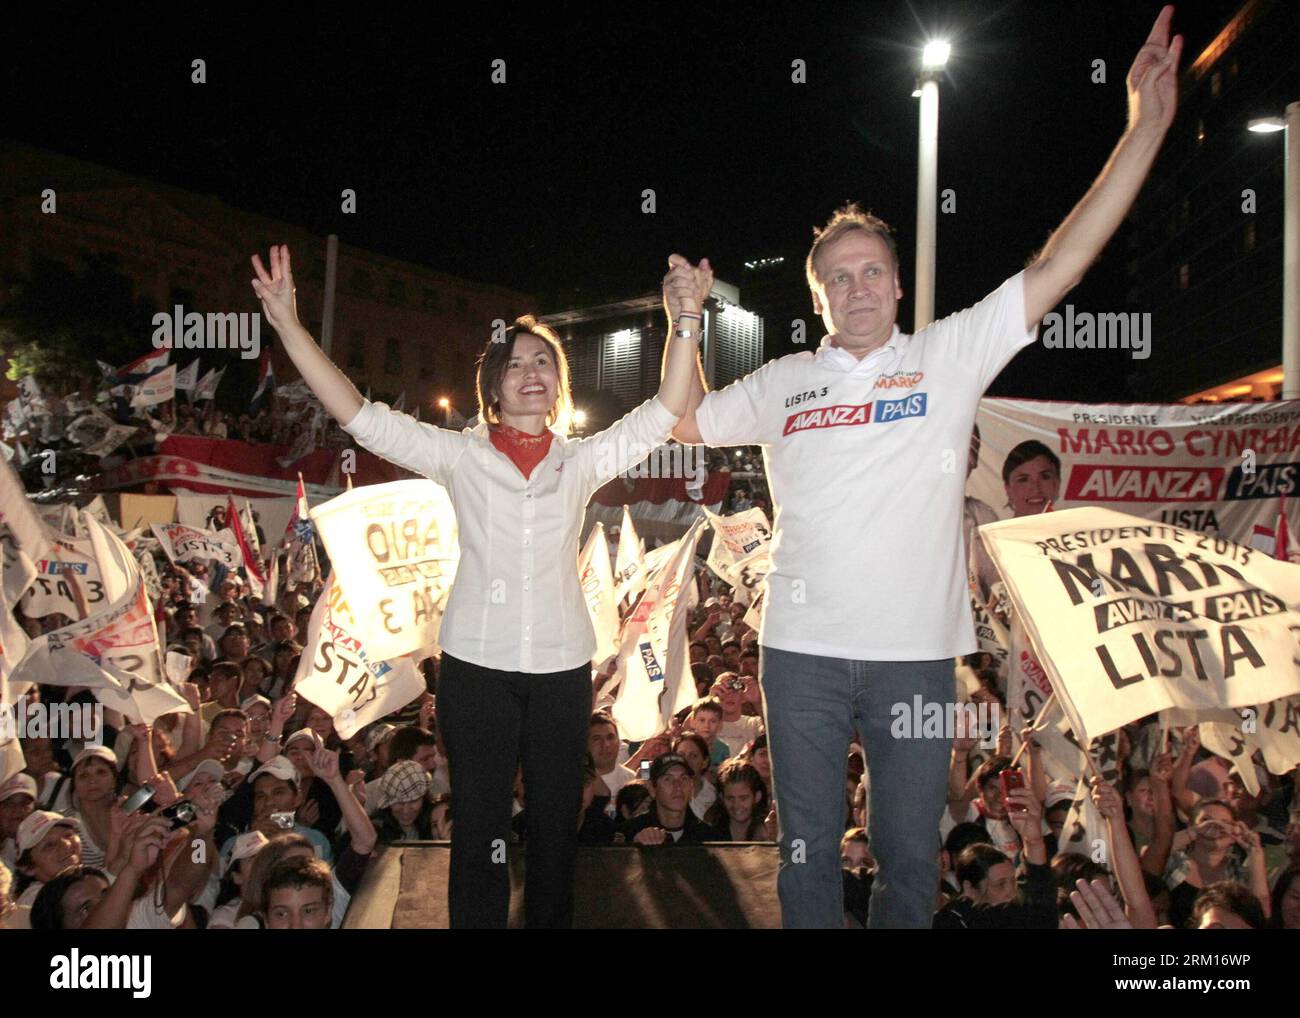 Bildnummer: 59528058  Datum: 16.04.2013  Copyright: imago/Xinhua (130417) -- ASUNCION, April 17, 2013 (Xinhua) -- Presidential candidate Mario Ferreiro (R) and his running partner Cintia Brizuela (L), both of the Avanza Pais Party, attend a campaign rally in Asuncion, capital of Paraguay, on April 16, 2013. Paraguay will hold presidential election on April 21. (Xinhua/Jose Villaba) (jv) (rh) (py) PARAGUAY-PRESIDENTIAL ELECTION-CAMPAIGNS PUBLICATIONxNOTxINxCHN Politik people Wahl Präsidentschaftswahl xas x0x 2013 quer premiumd      59528058 Date 16 04 2013 Copyright Imago XINHUA  Asuncion April Stock Photo